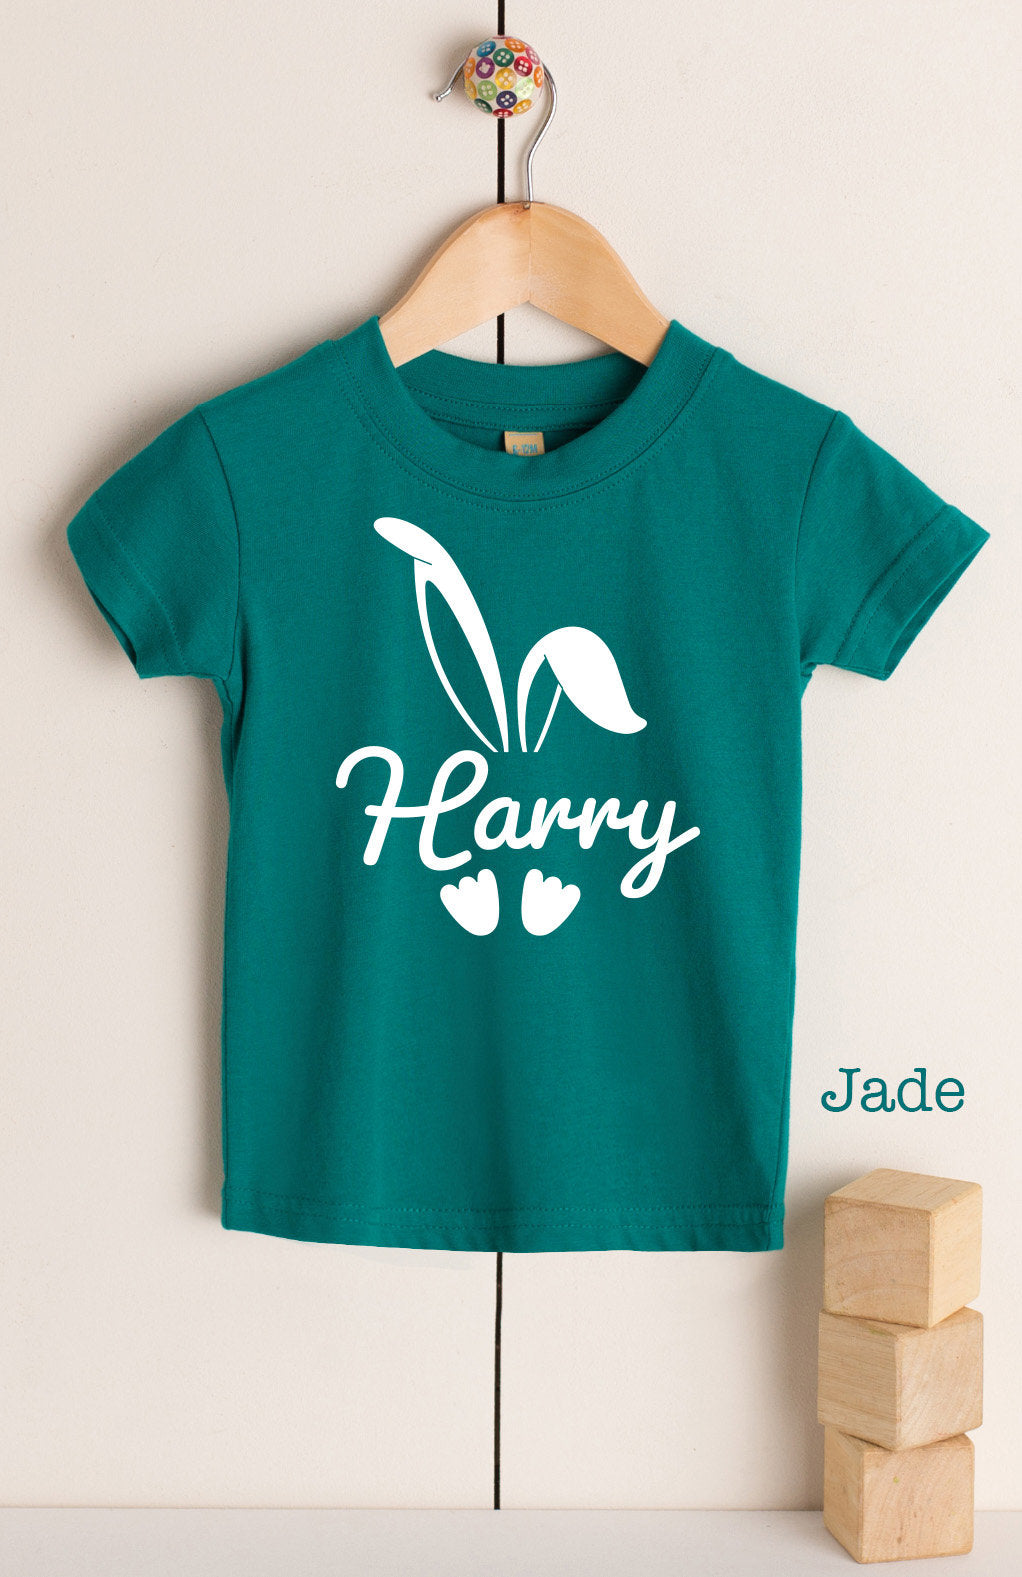 Easter Bunny with Any Name - Babies/Toddlers Personalised T-Shirt - LW020 Funny Kids Customised Tee